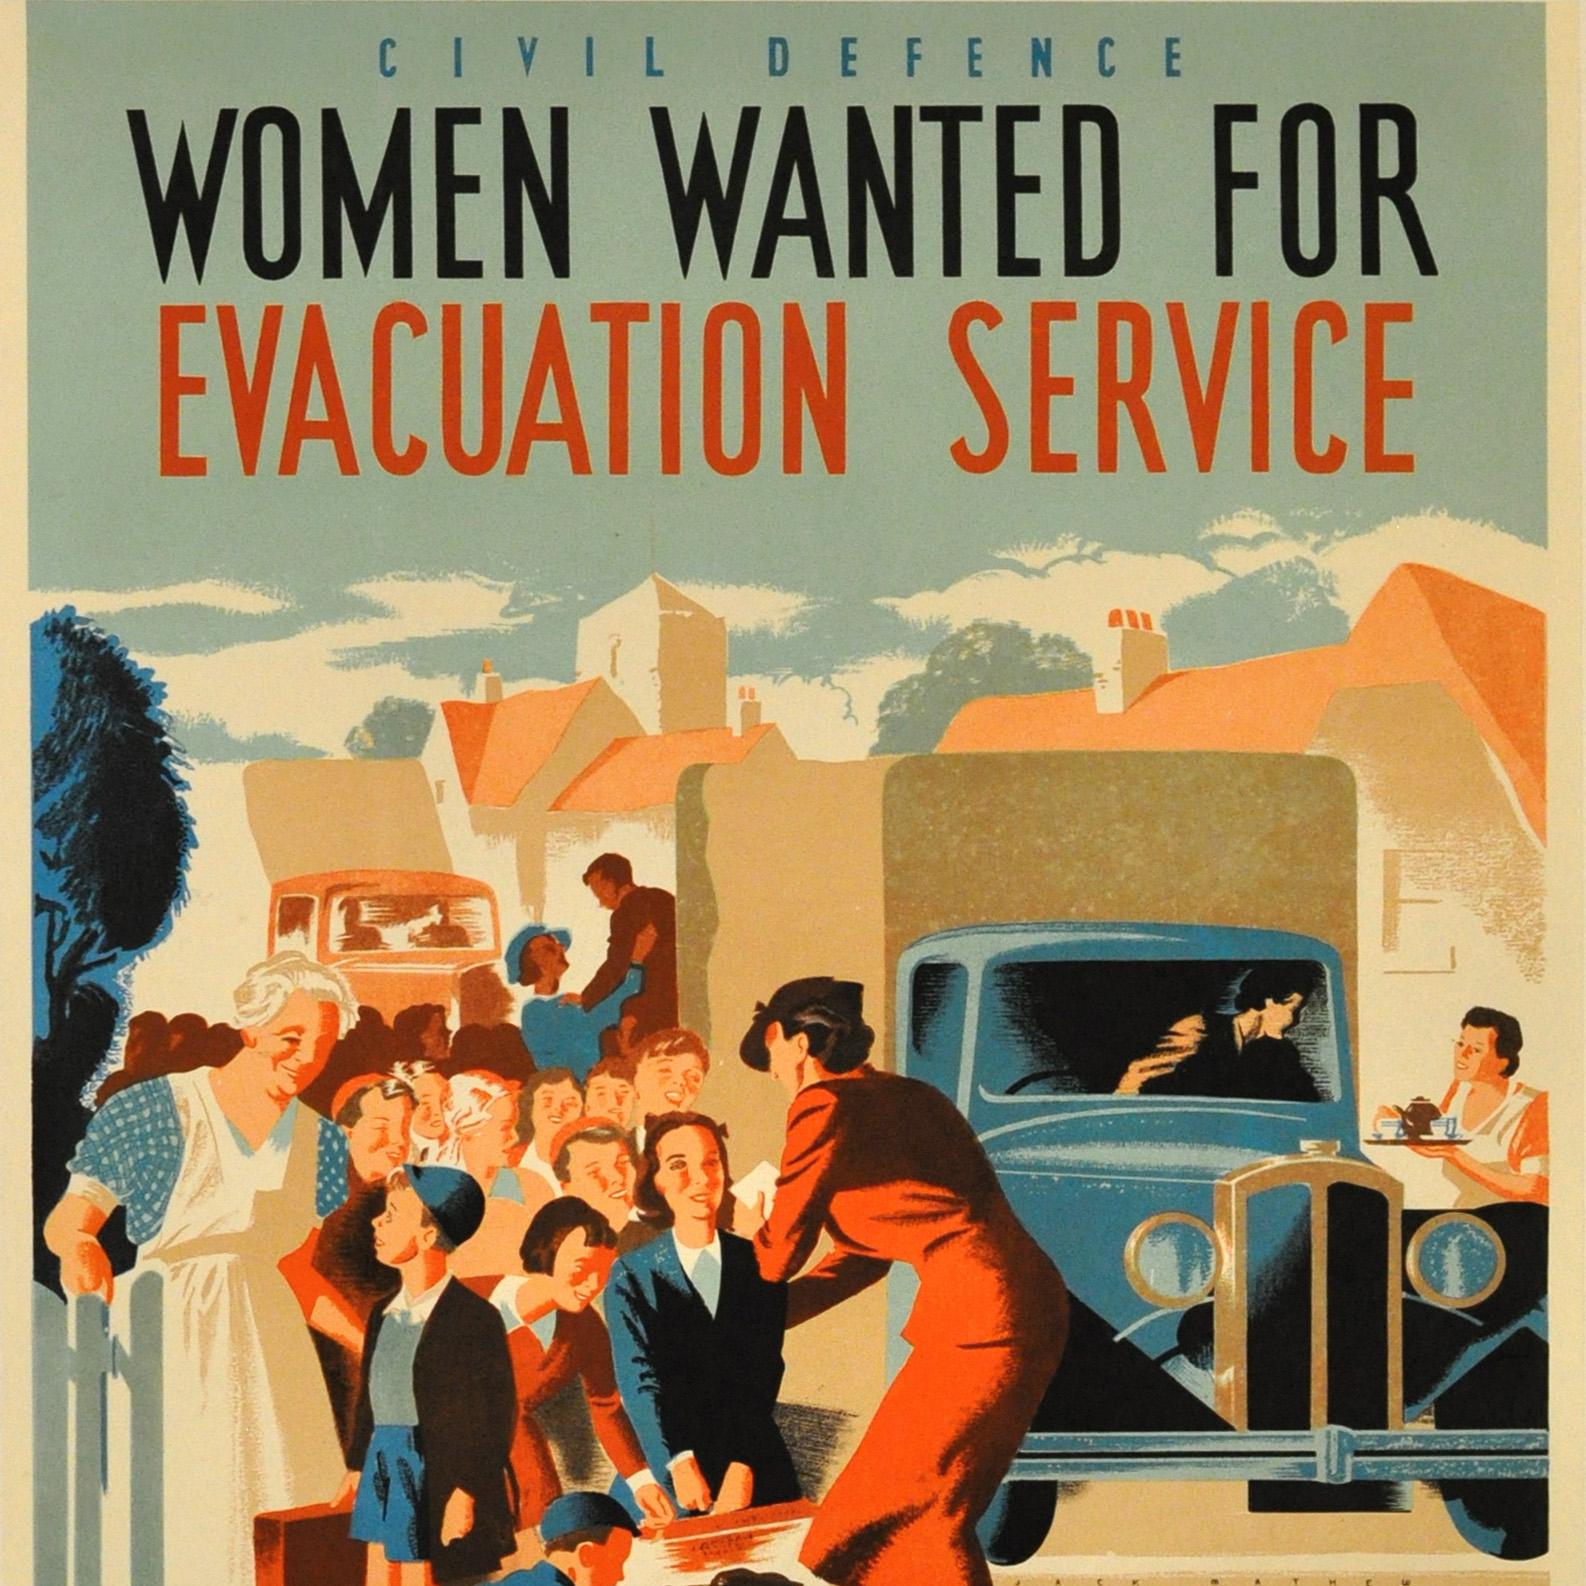 Original vintage World War Two poster: Civil Defence, Women wanted for Evacuation Service, offer your services to your local council or any branch of Women's Voluntary Services. Image of lady volunteers helping a group of evacuee children dressed in